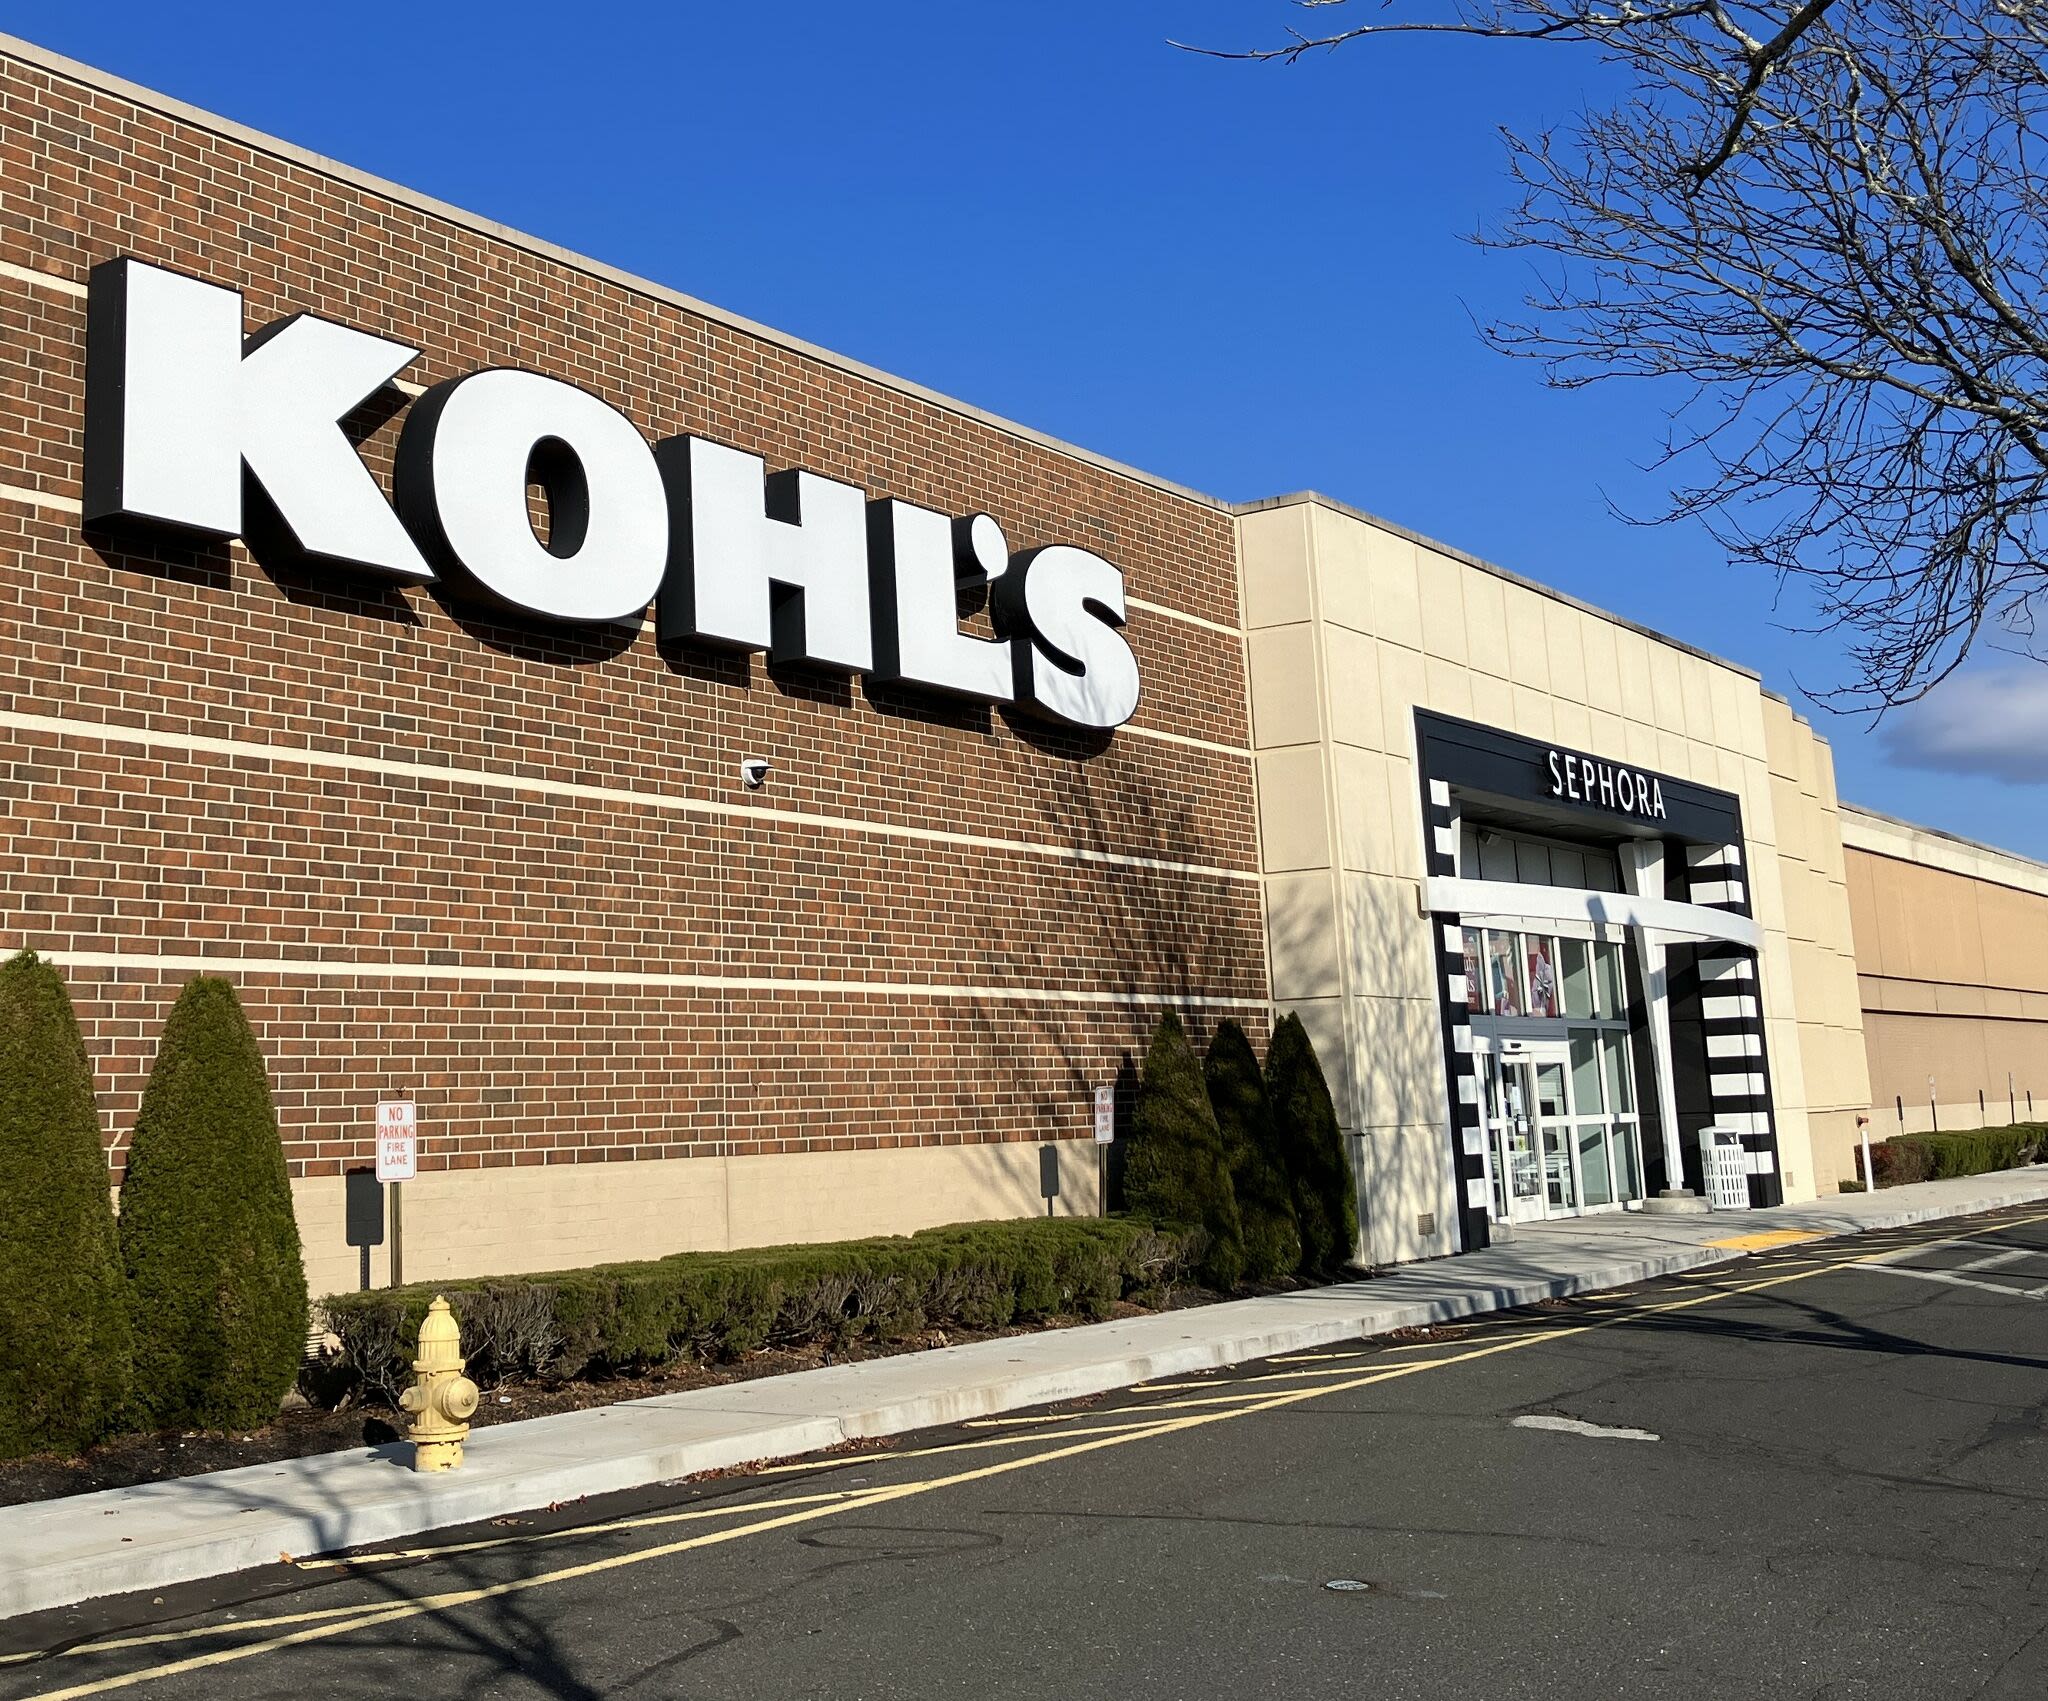 Rocky Hill CT retail site that includes a Kohl's and Aldi with plenty of room to grow sold for $12.6M